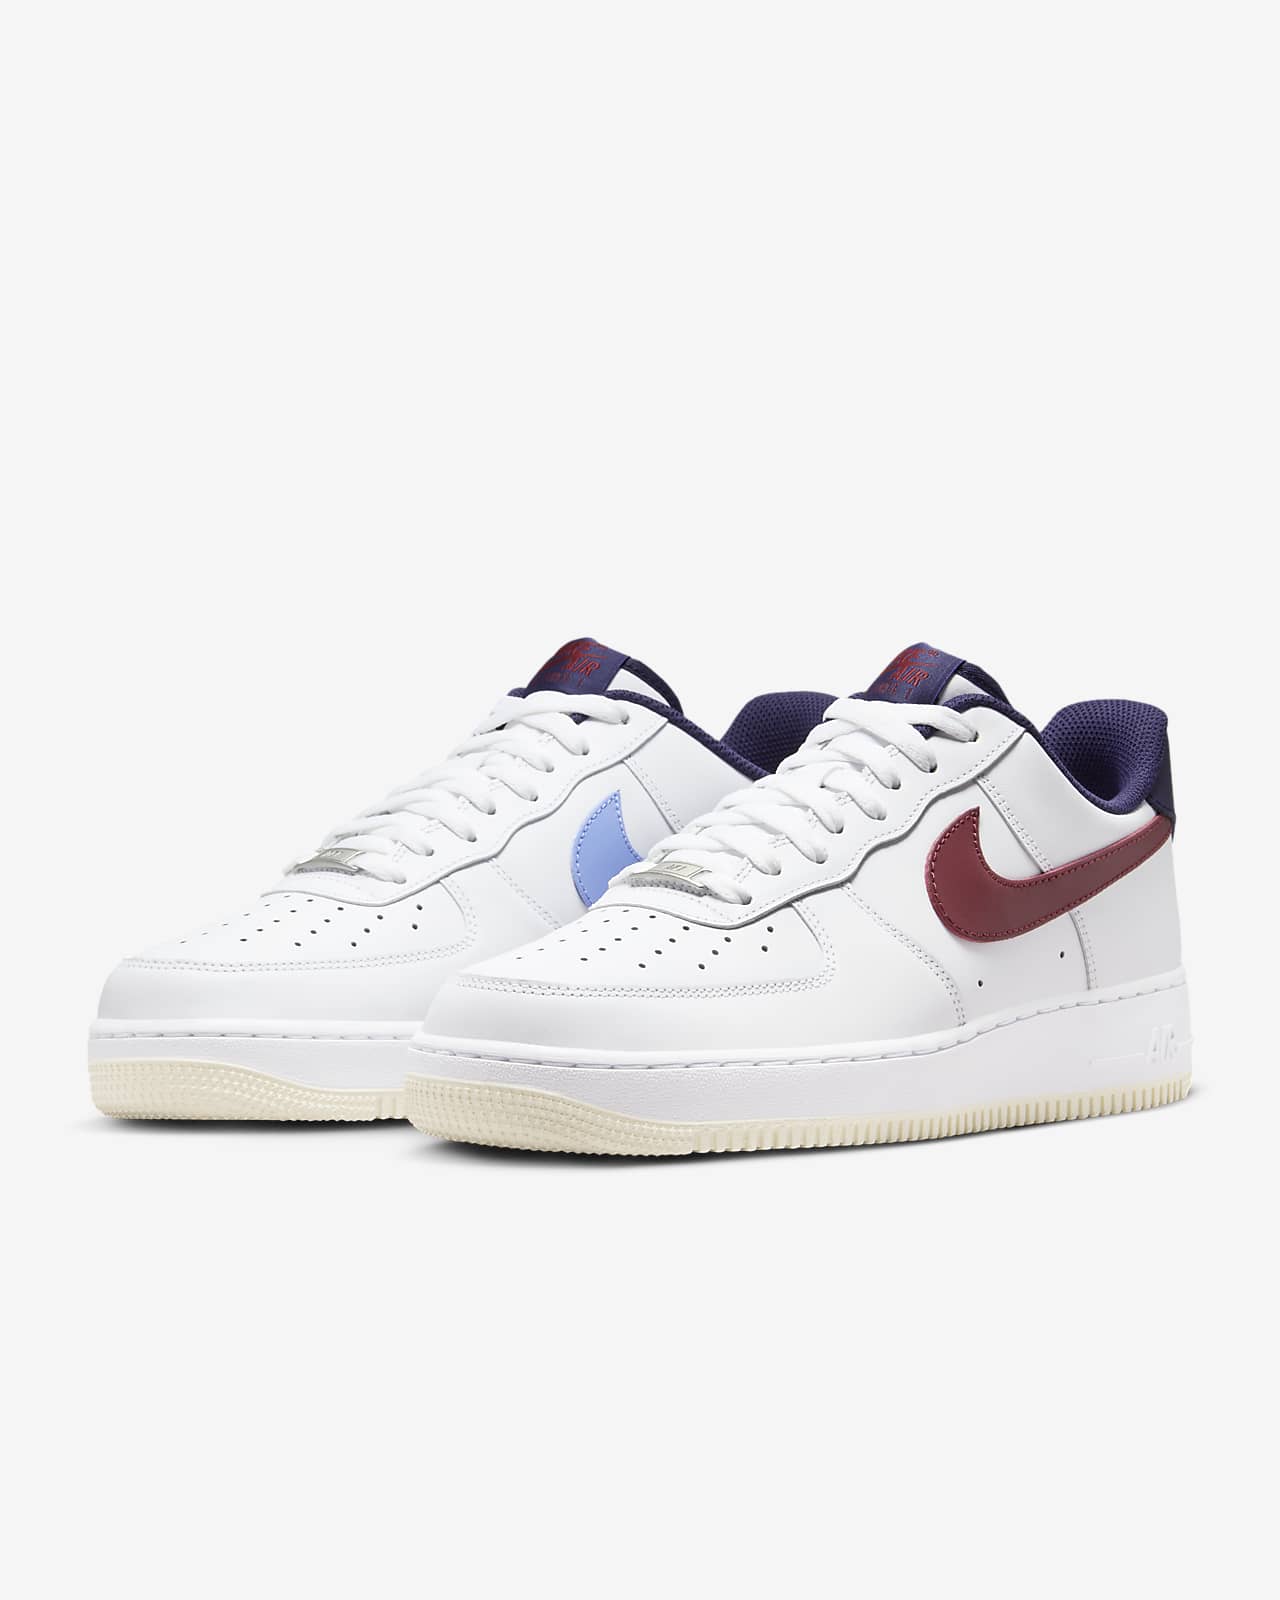 Shoes Nike AIR FORCE 1 07 LV8 4 